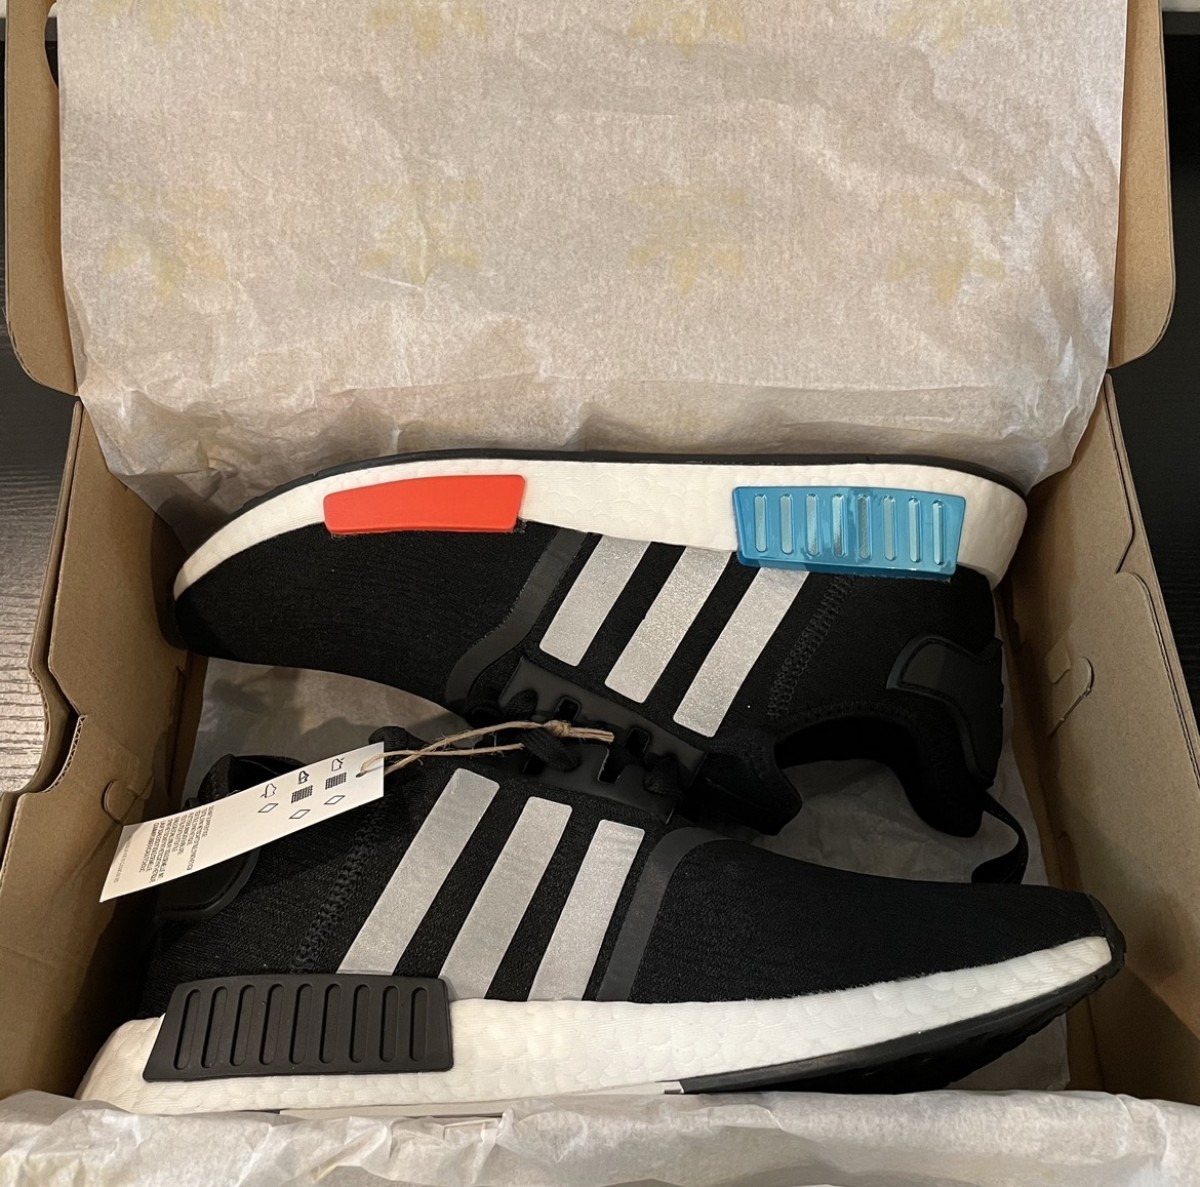 NMD R1 size 10.5 - 1